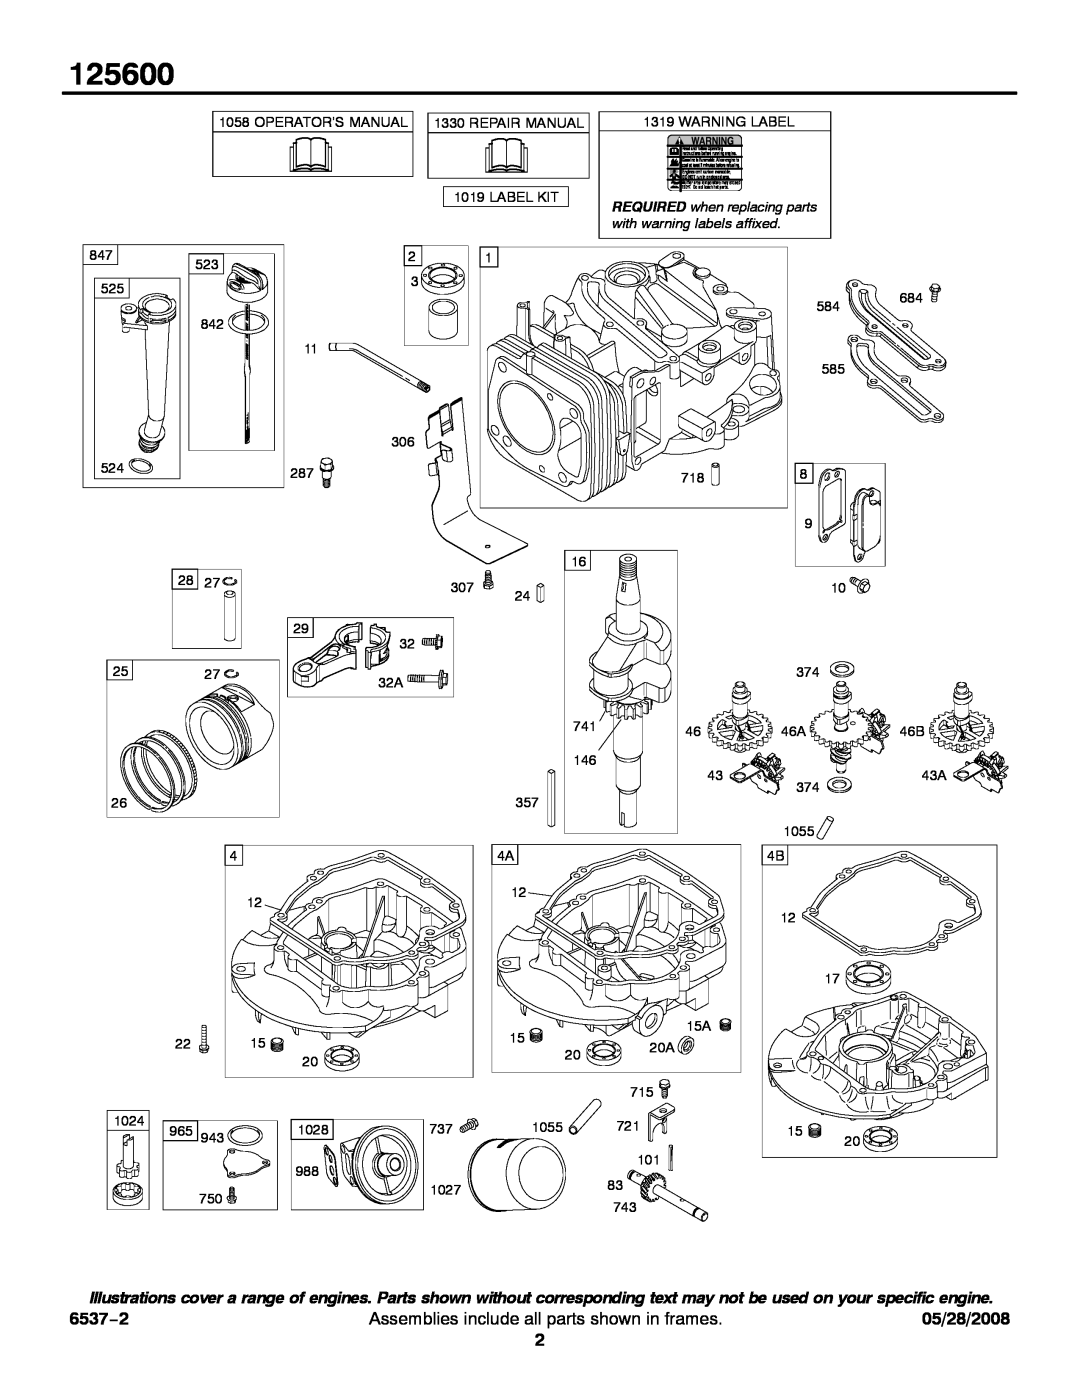 Briggs & Stratton 125600 service manual 6537−2, Assemblies include all parts shown in frames, 05/28/2008 